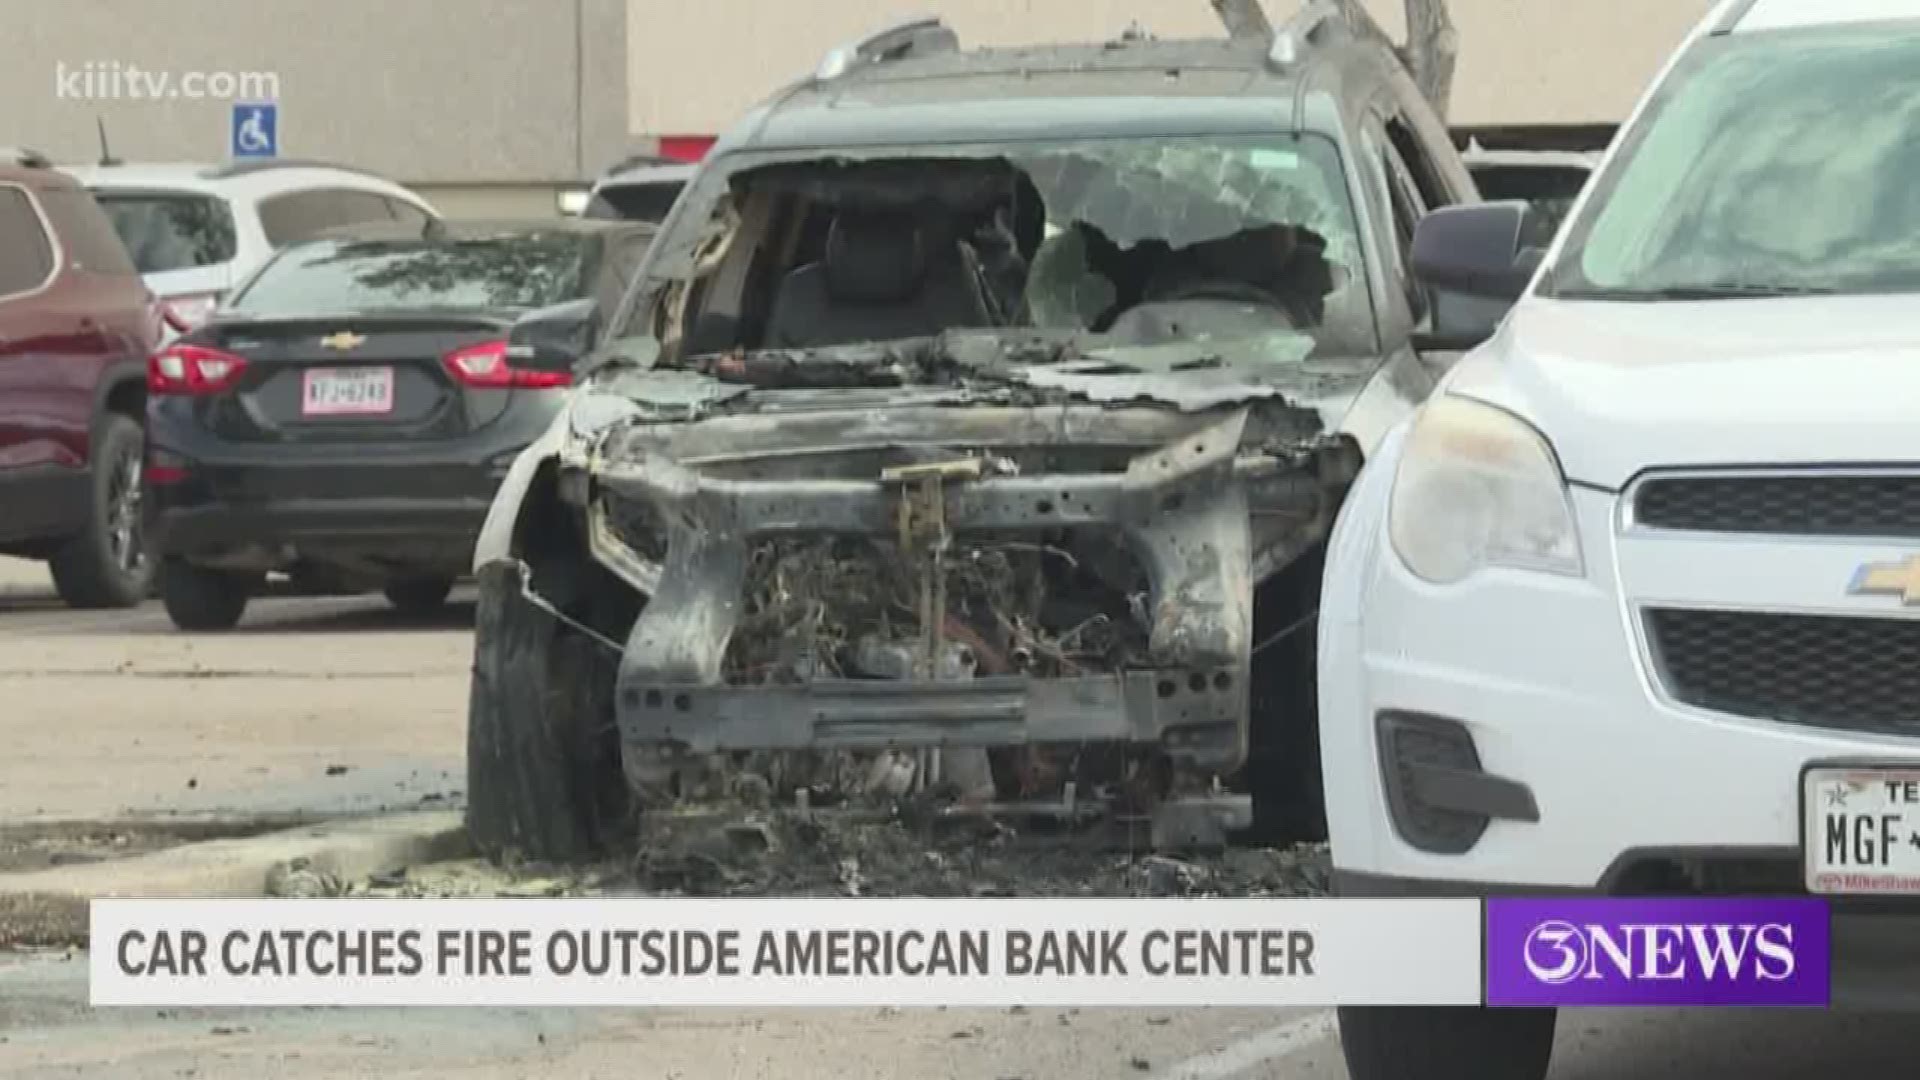 Officials say vehicles parked around the SUV that was on fire, sustained minor damages.